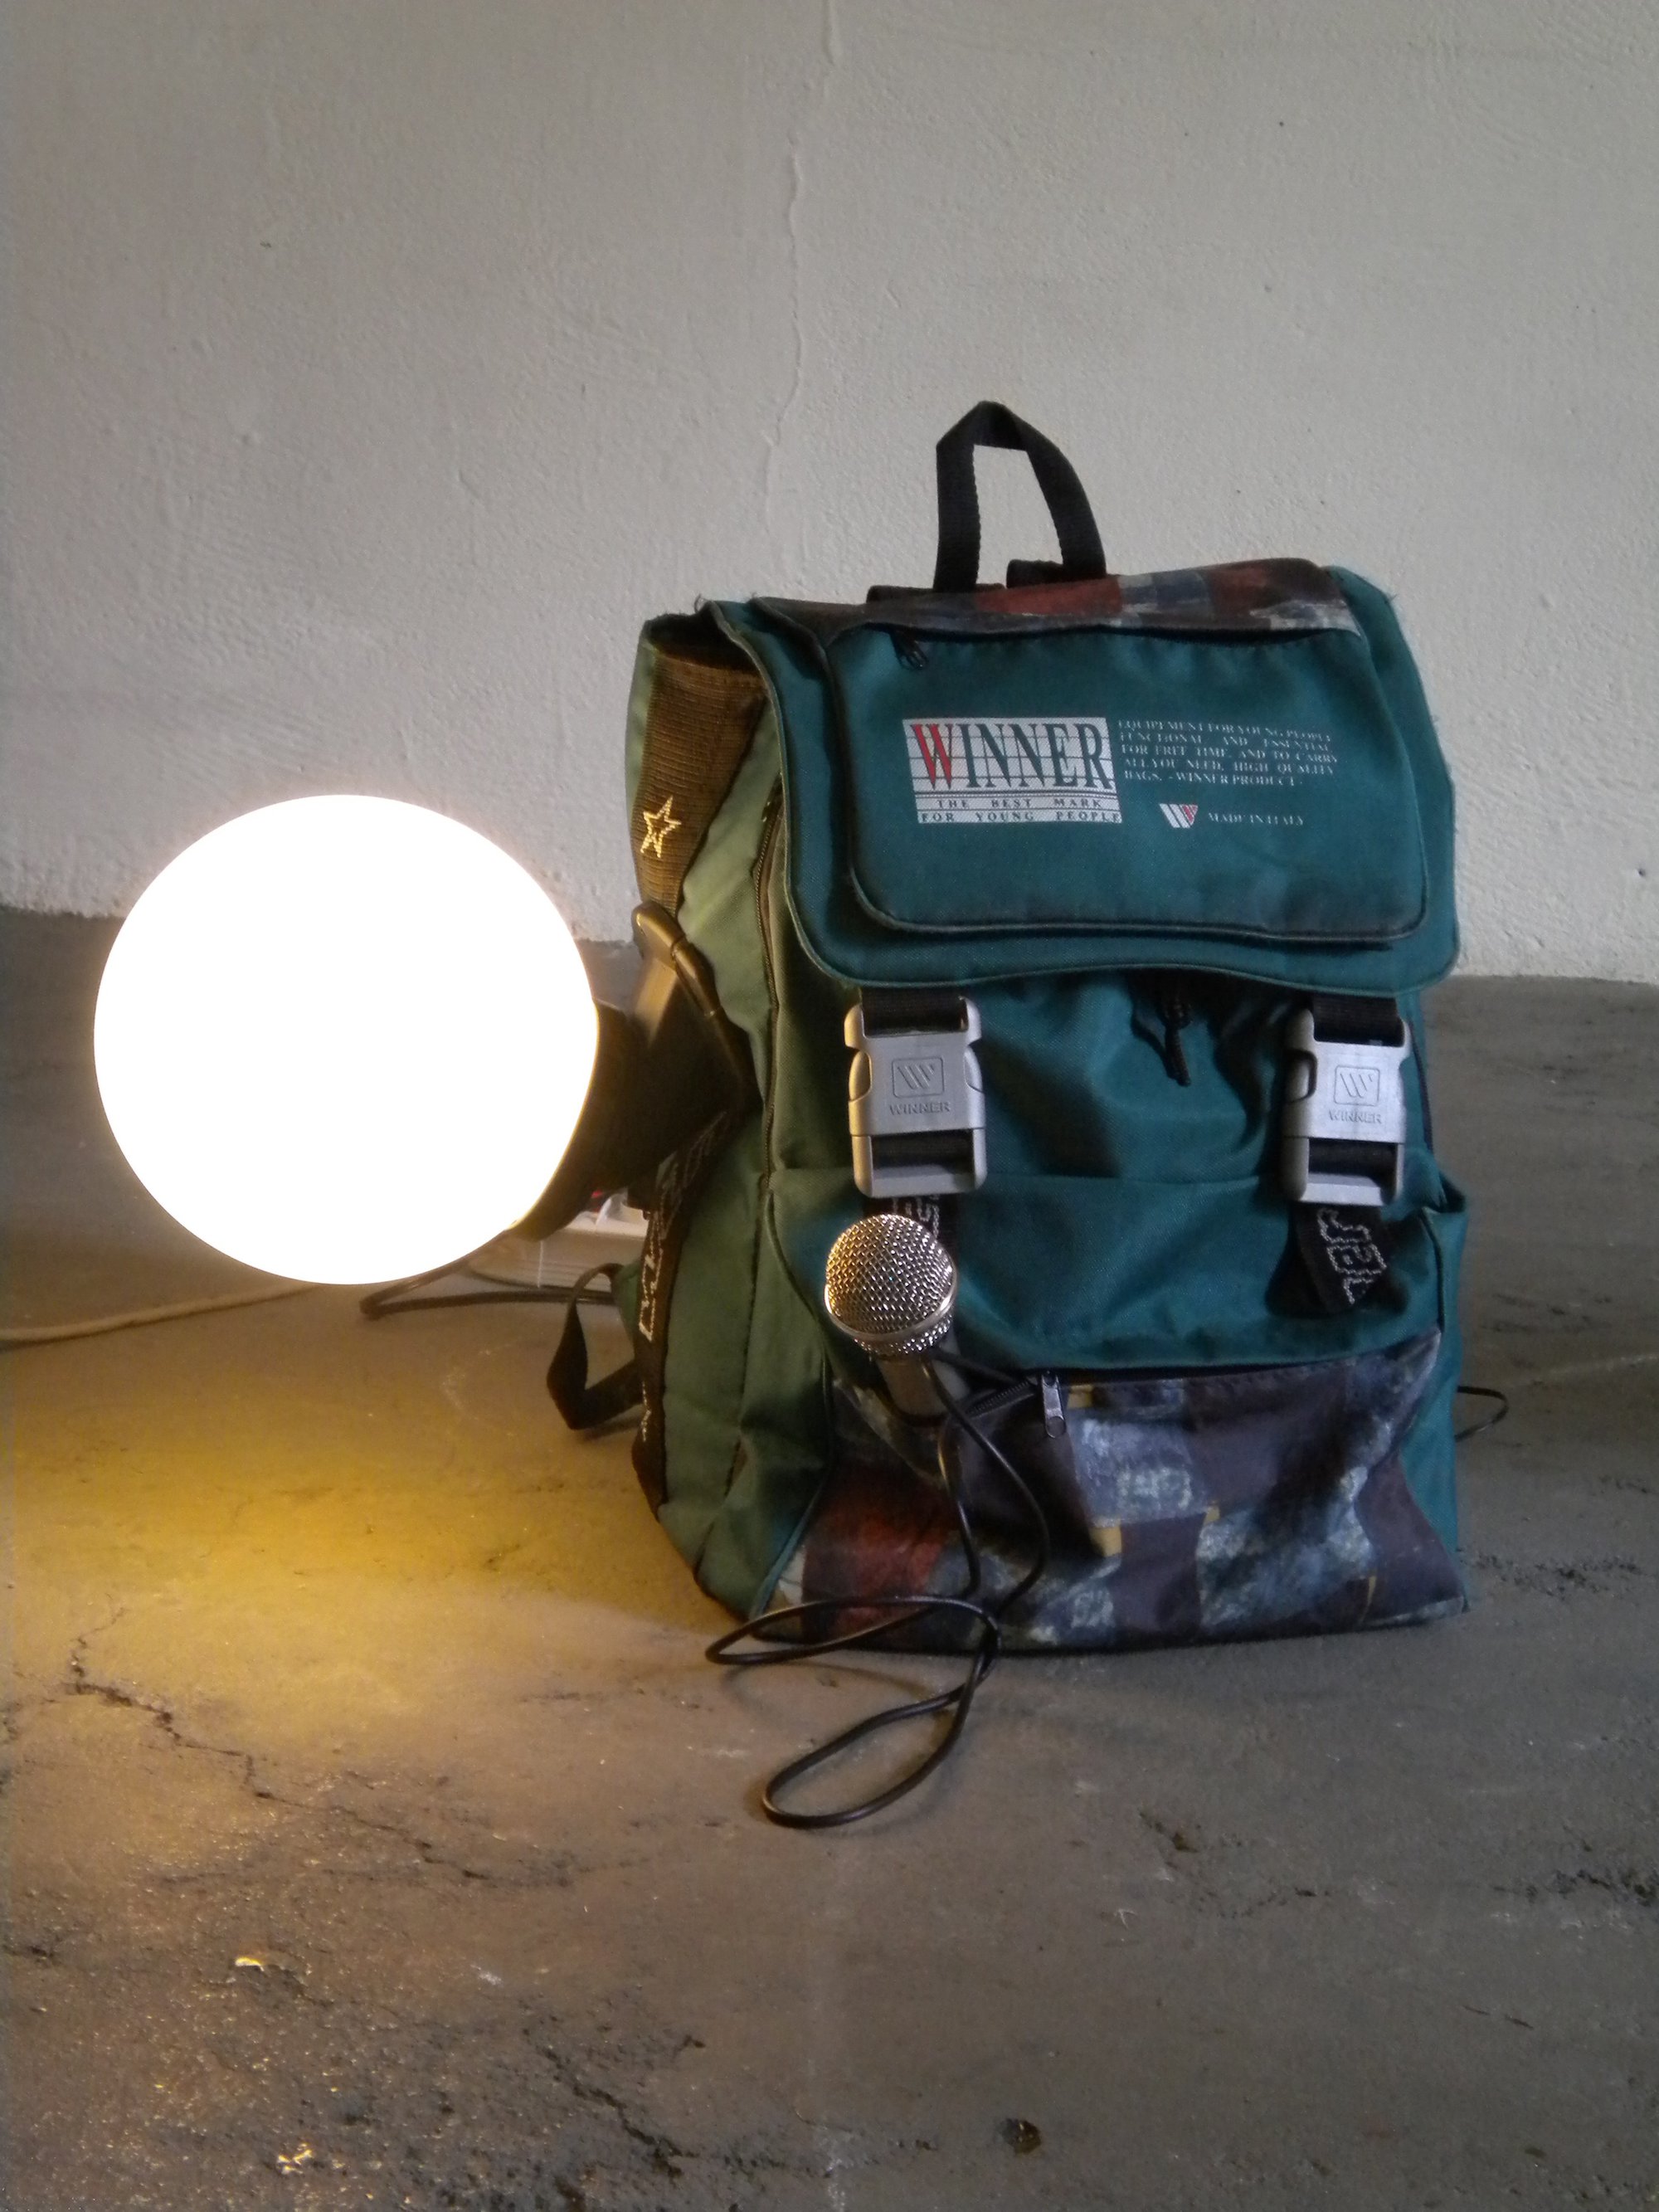 Liliana Moro, Maria, white globe lamp with lighted bulb, microphone, backpack with loudspeaker inside, soundtrack: operas sung by Maria Callas, dimensions variable, 2012